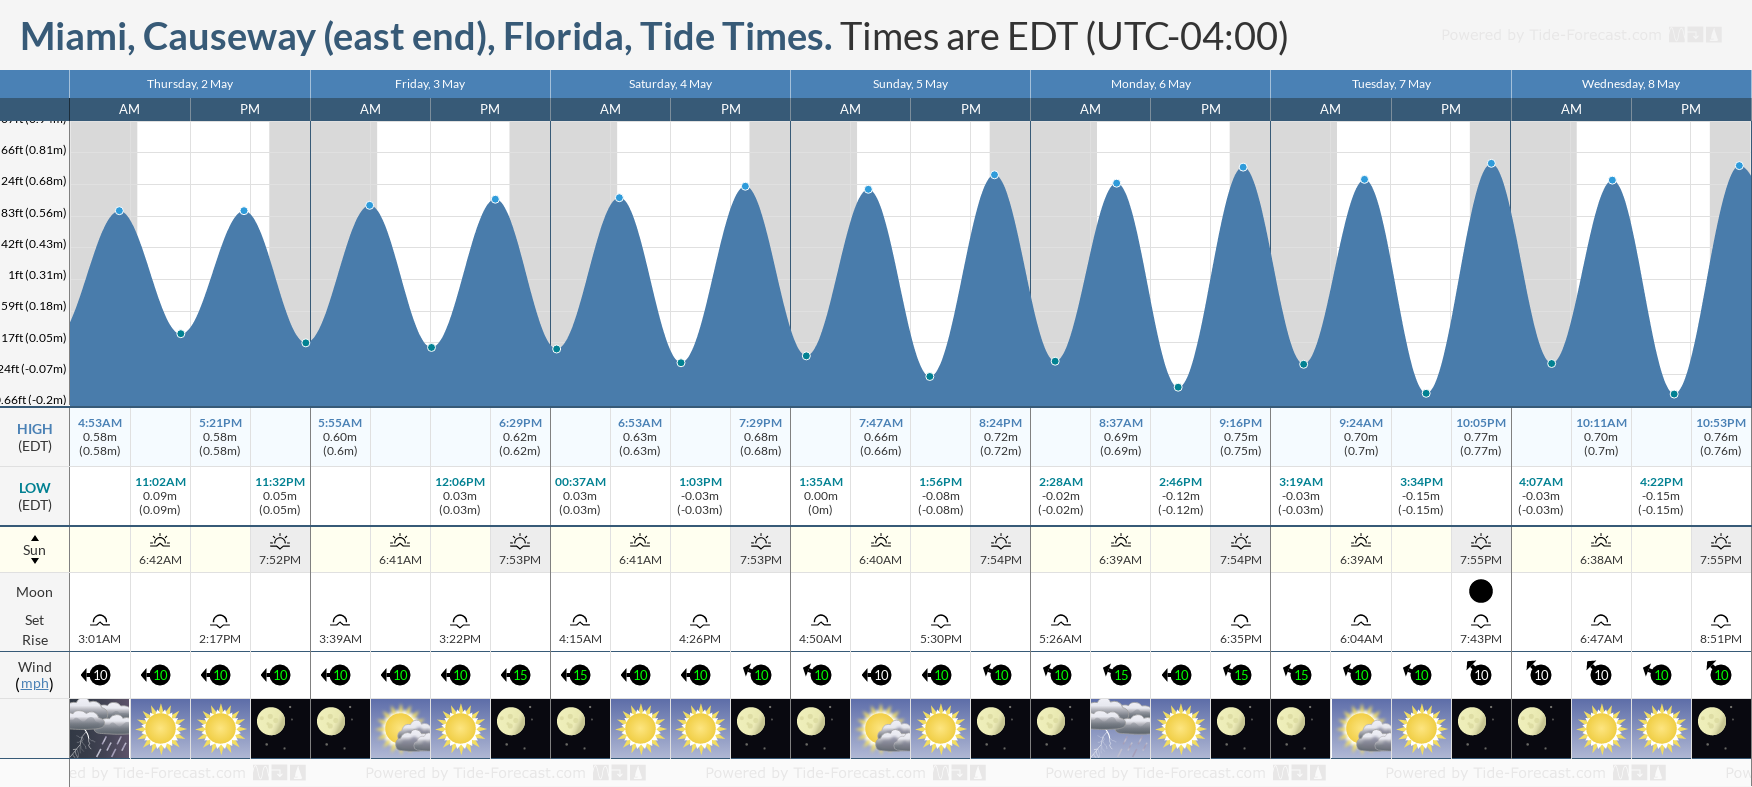 Miami, Causeway (east end), Florida Tide Chart including high and low tide tide times for the next 7 days